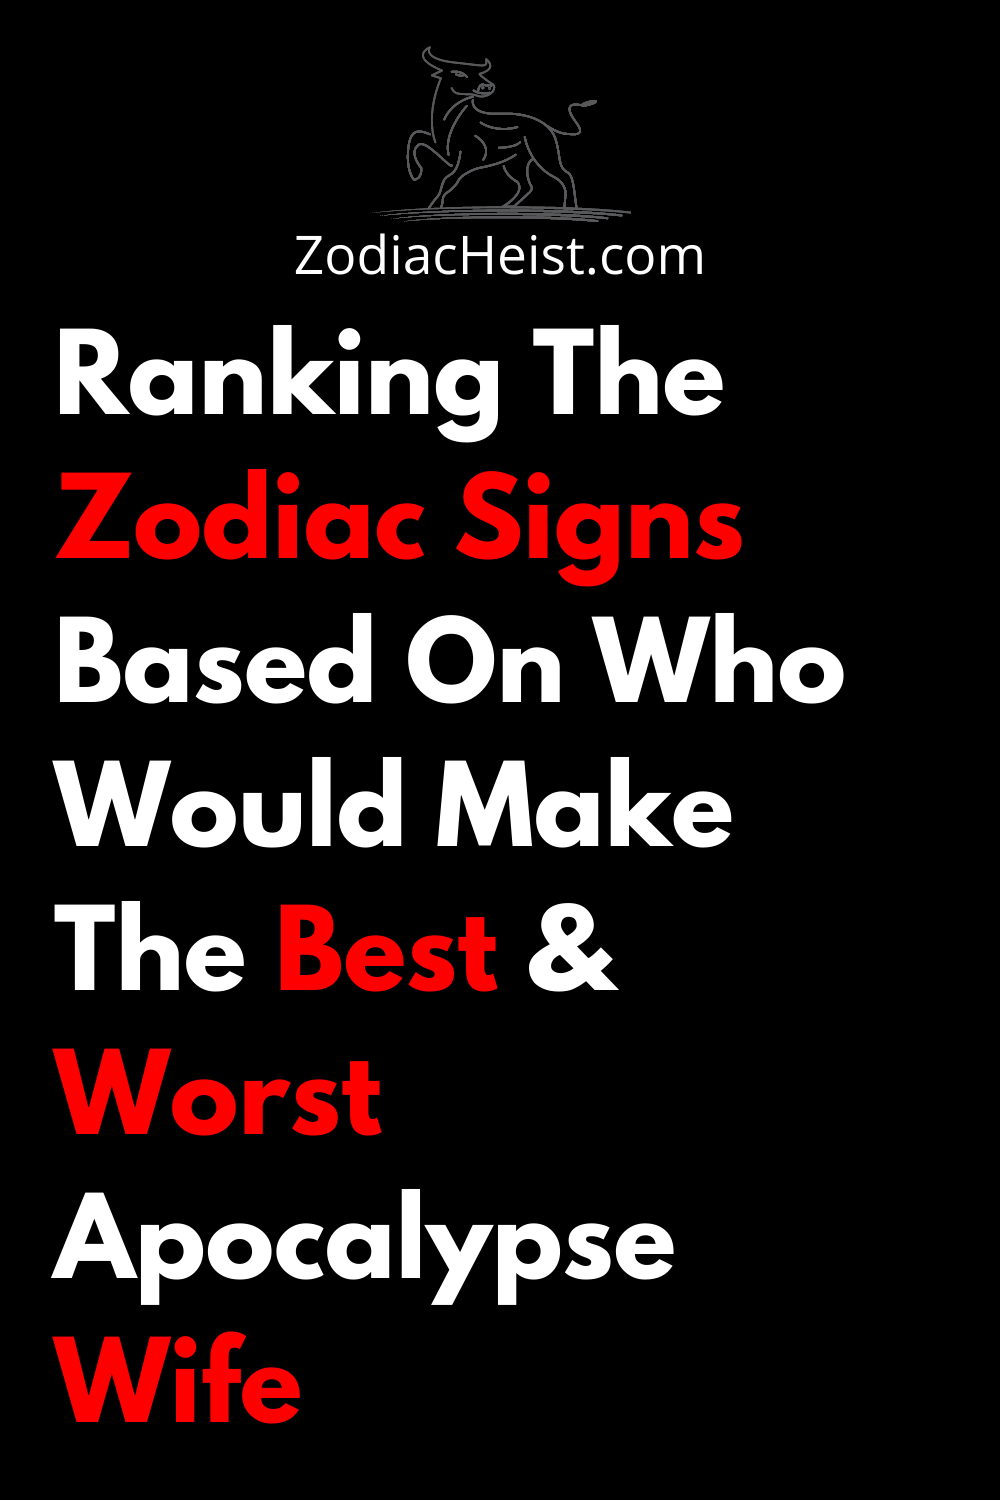 Ranking The Zodiac Signs Based On Who Would Make The Best & Worst Apocalypse Wife